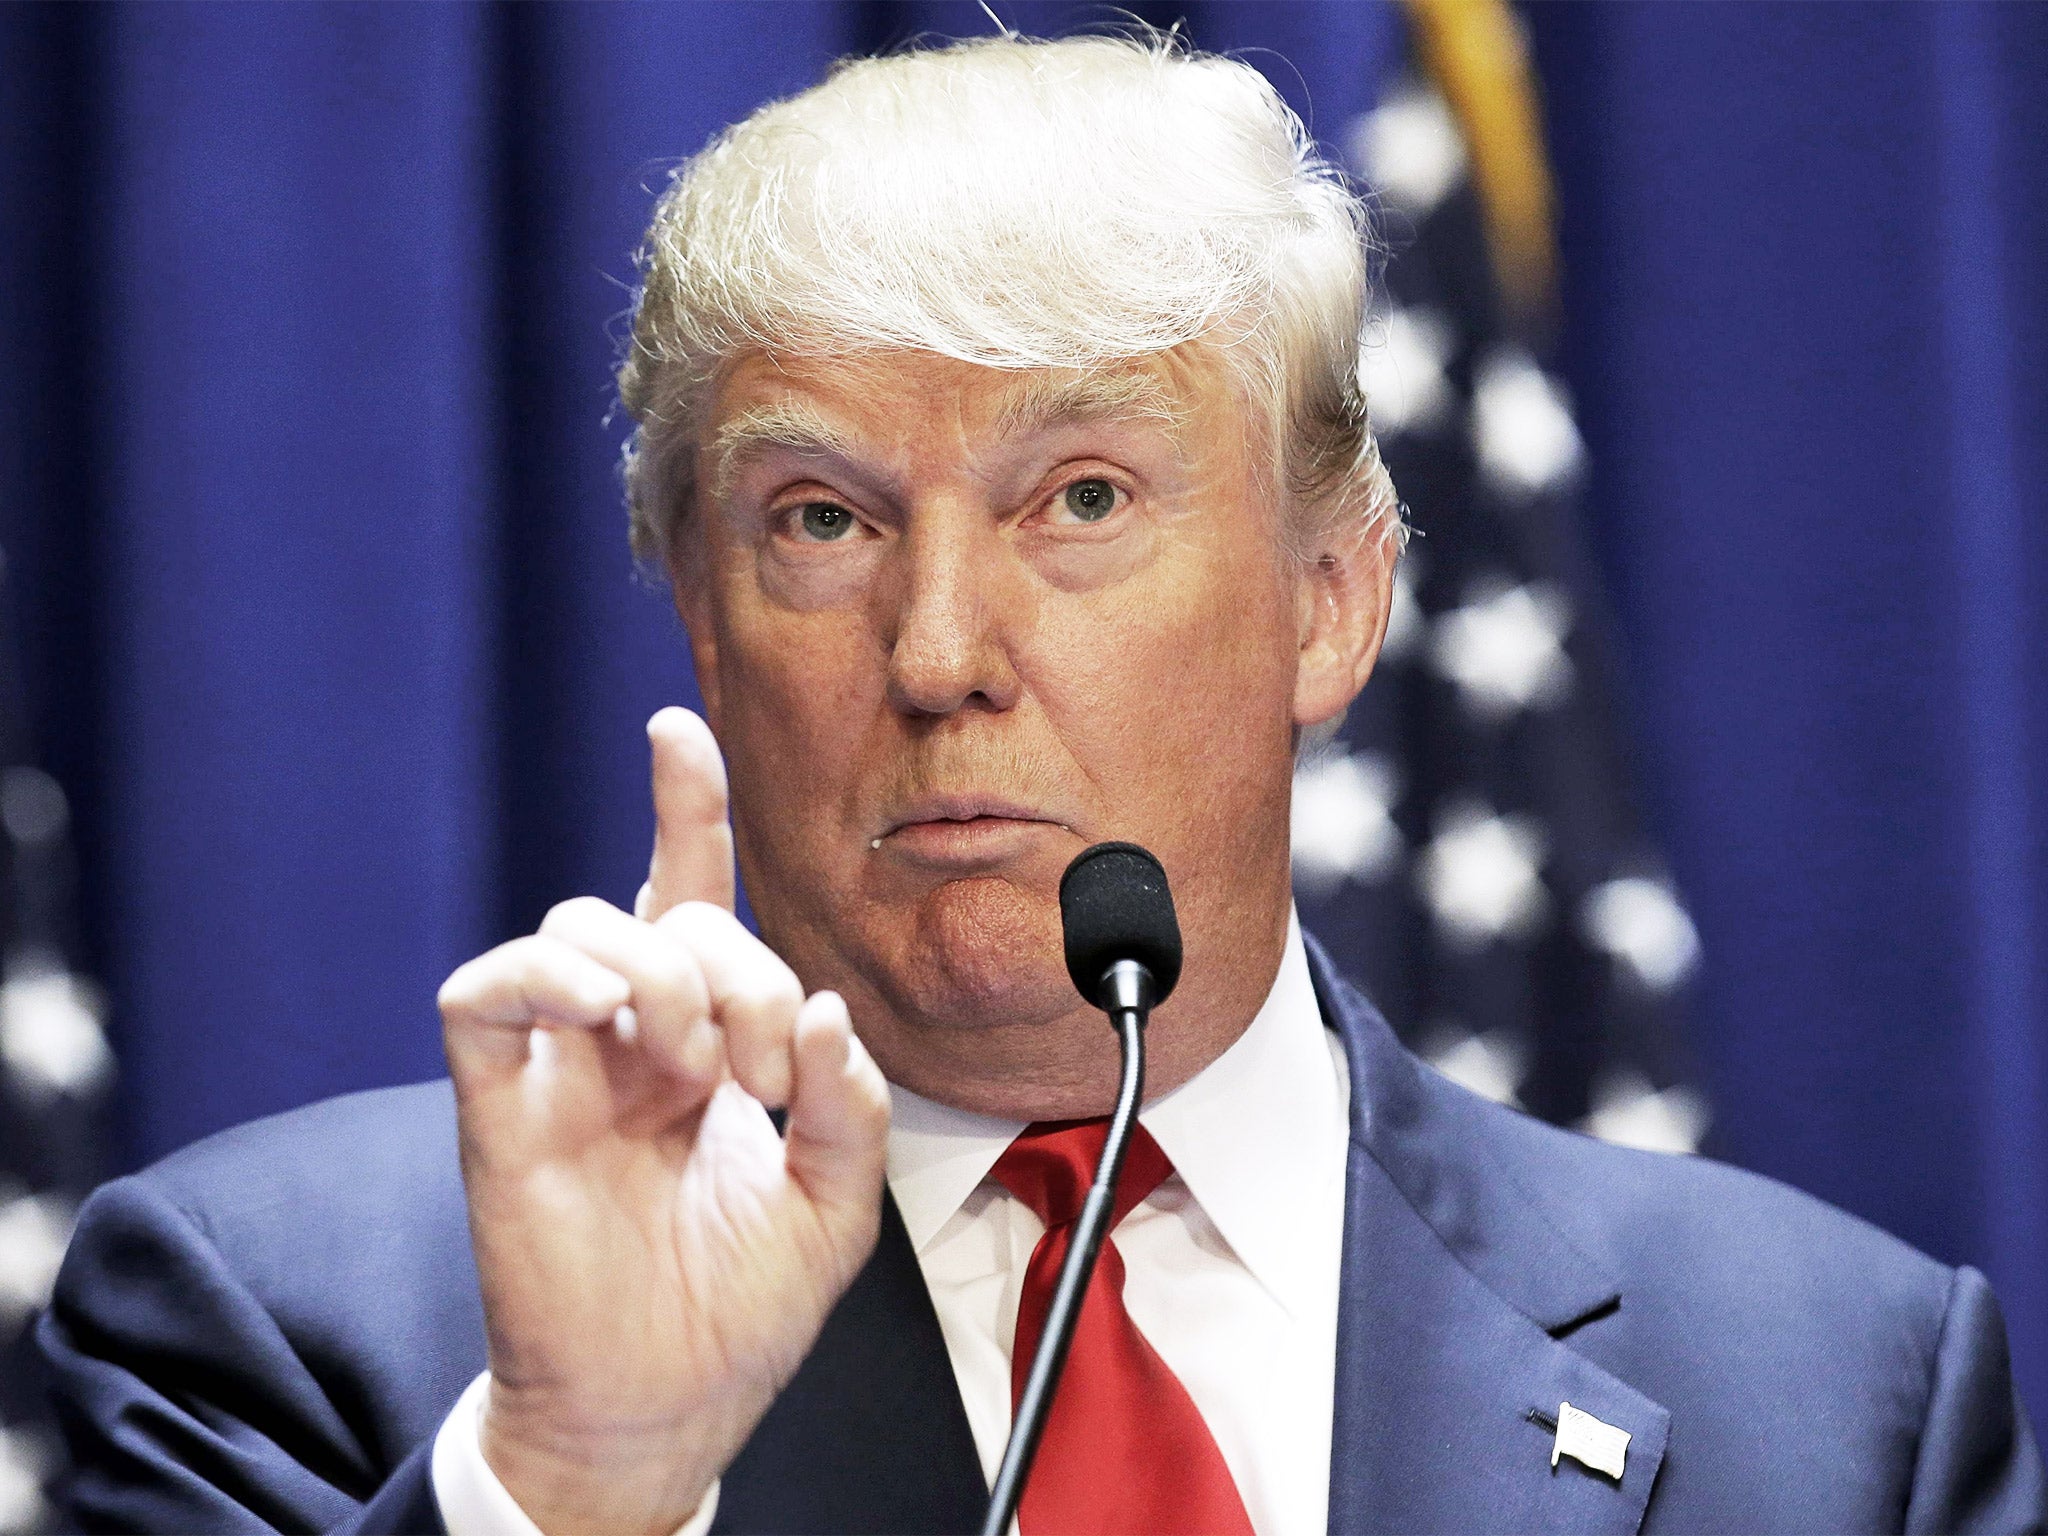 Real estate mogul and TV personality Donald Trump makes a point as he formally announces his campaign for the 2016 Republican presidential nomination